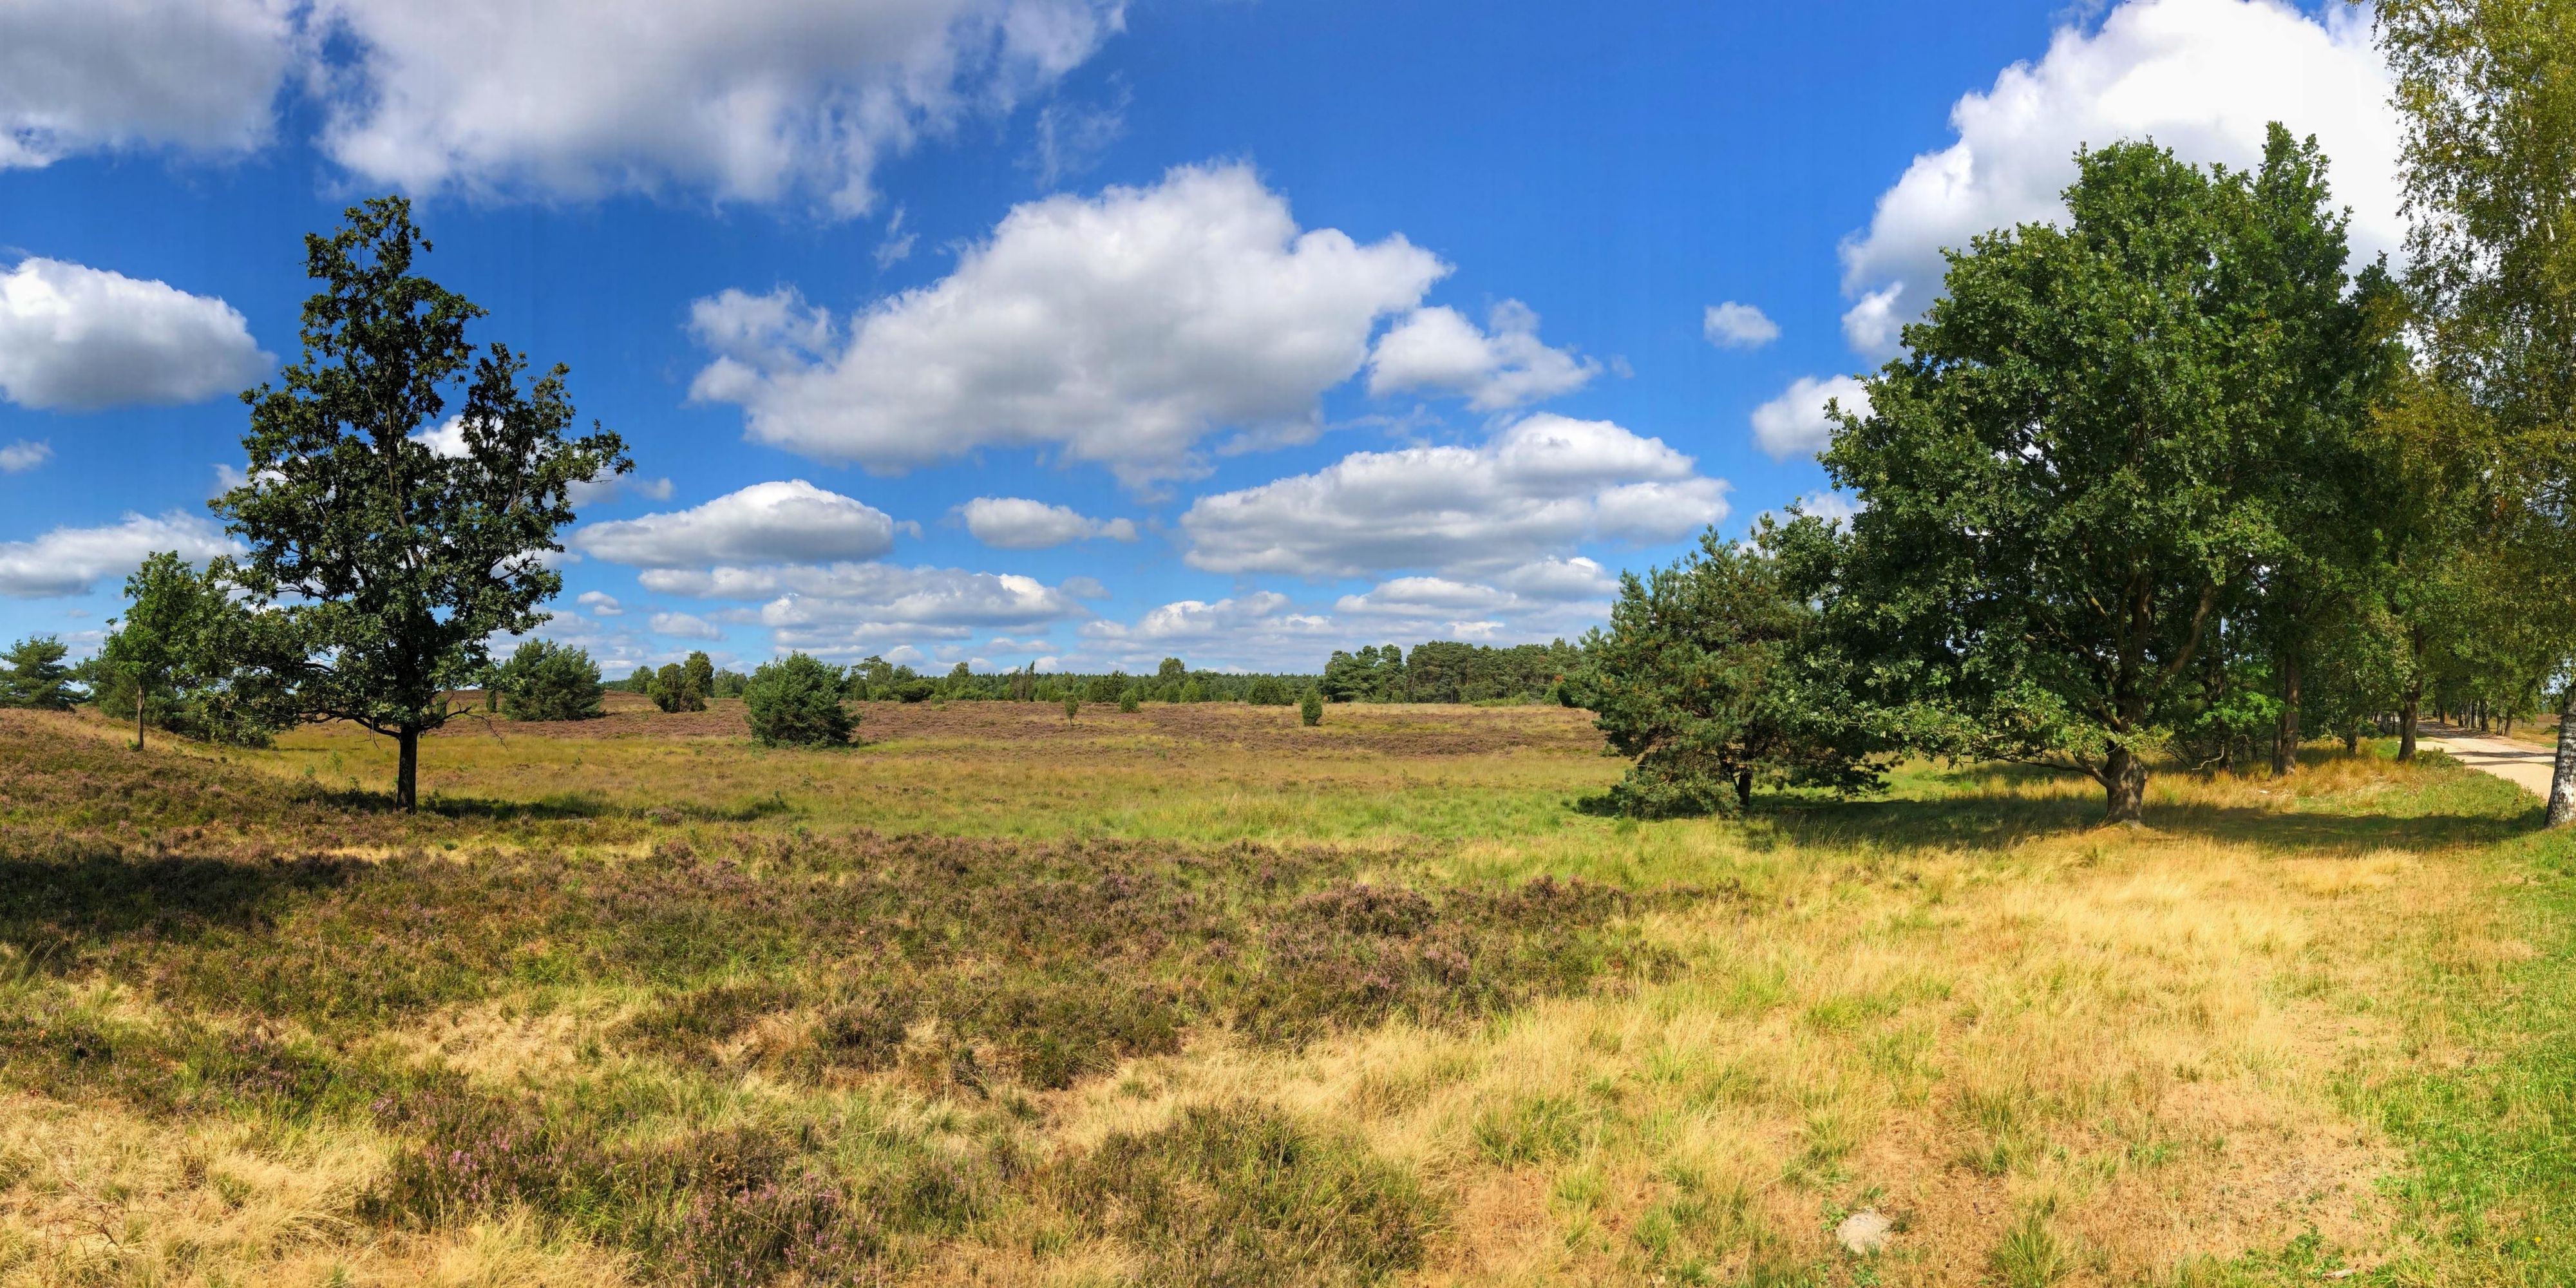 Did you know that the Lüneburger Heide is a nature park? They covered large parts of northern Germany until the beginning of the 19th century, but have now almost completely disappeared outside of the Lüneburger Heide.